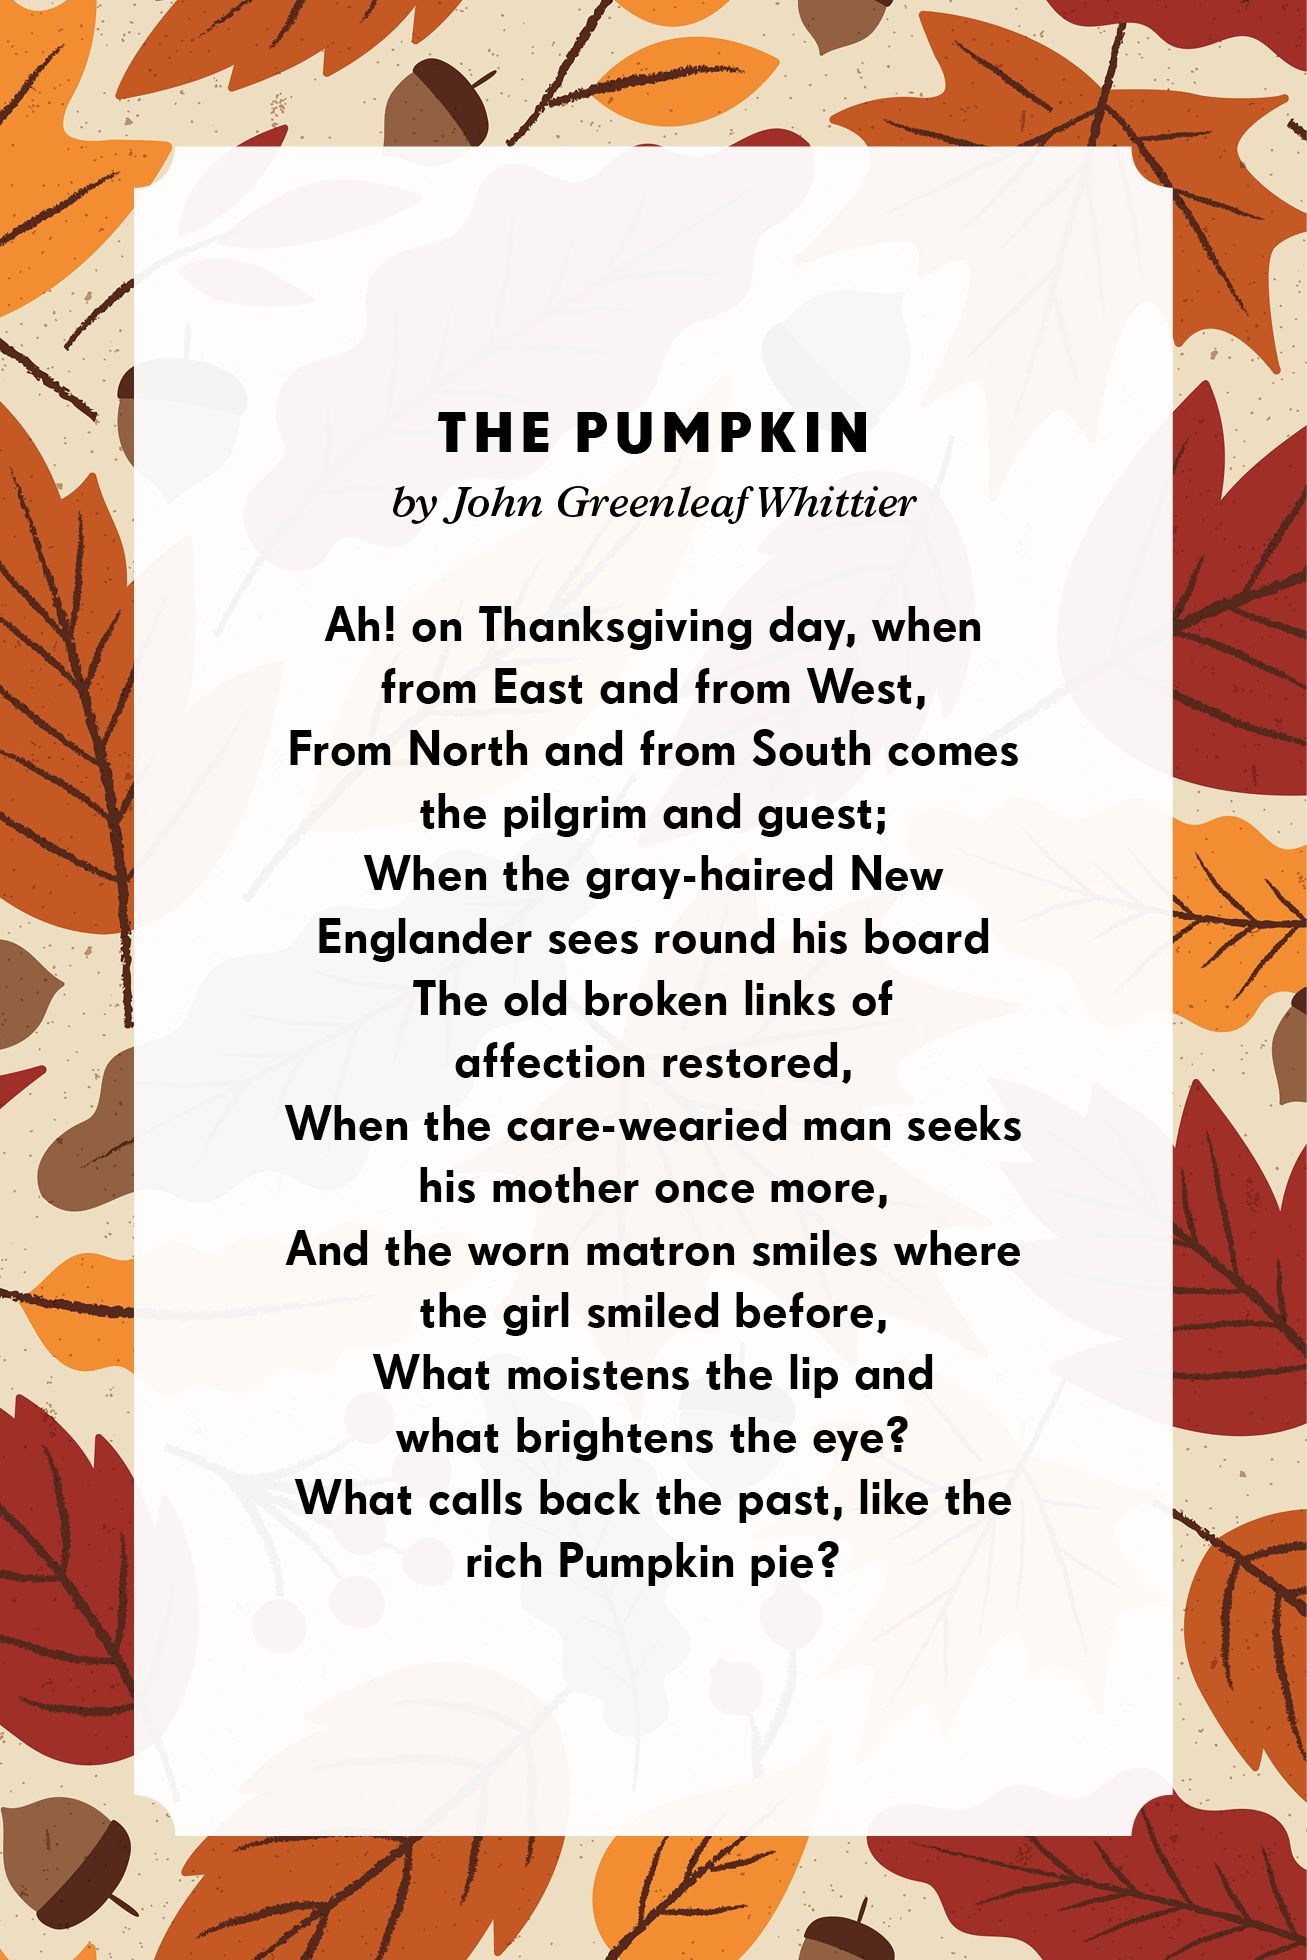 thanksgiving poems for lovers